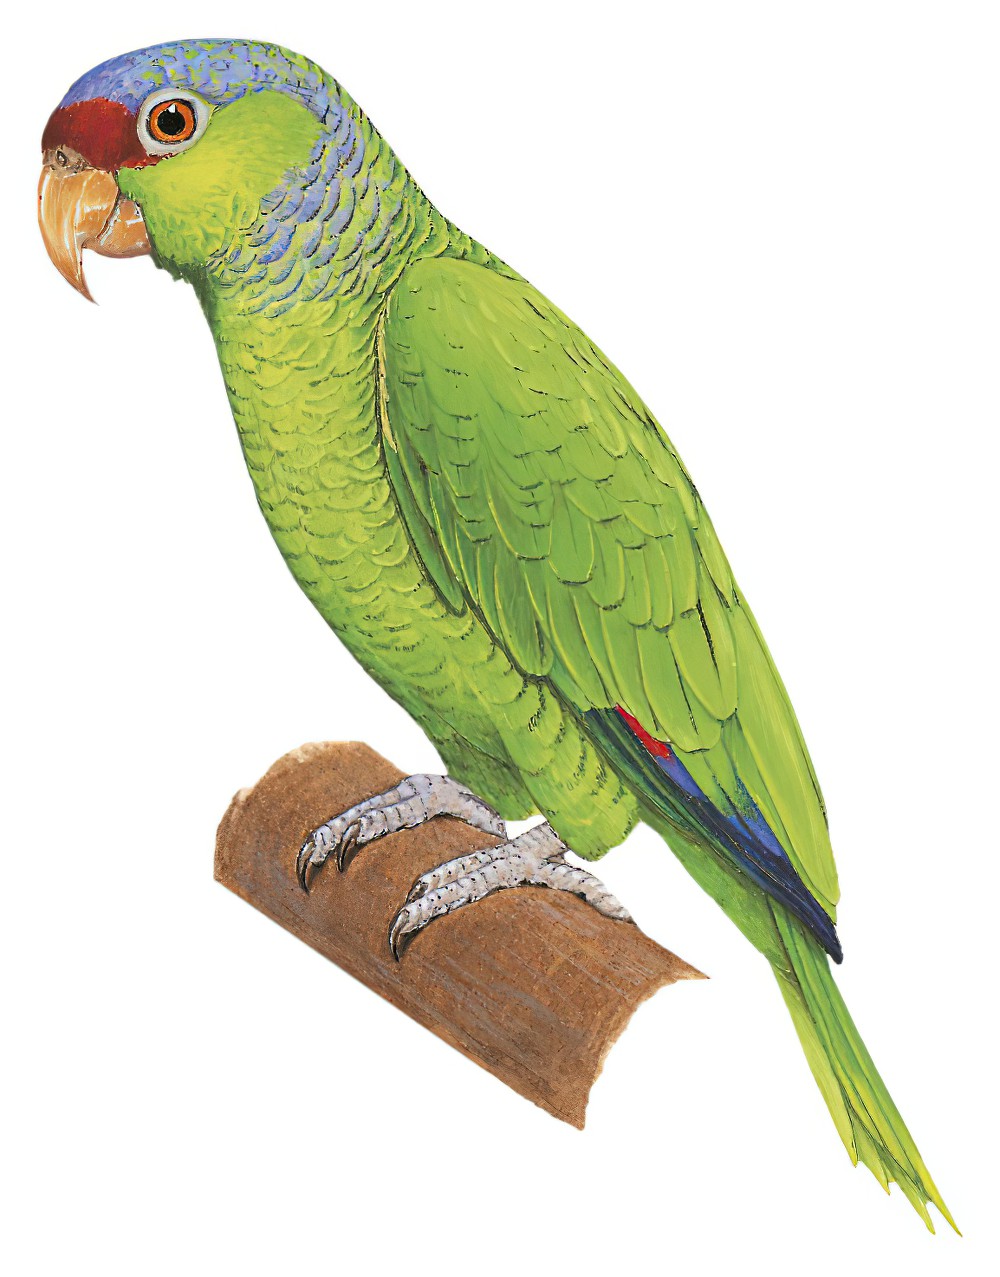 Lilac-crowned Parrot / Amazona finschi